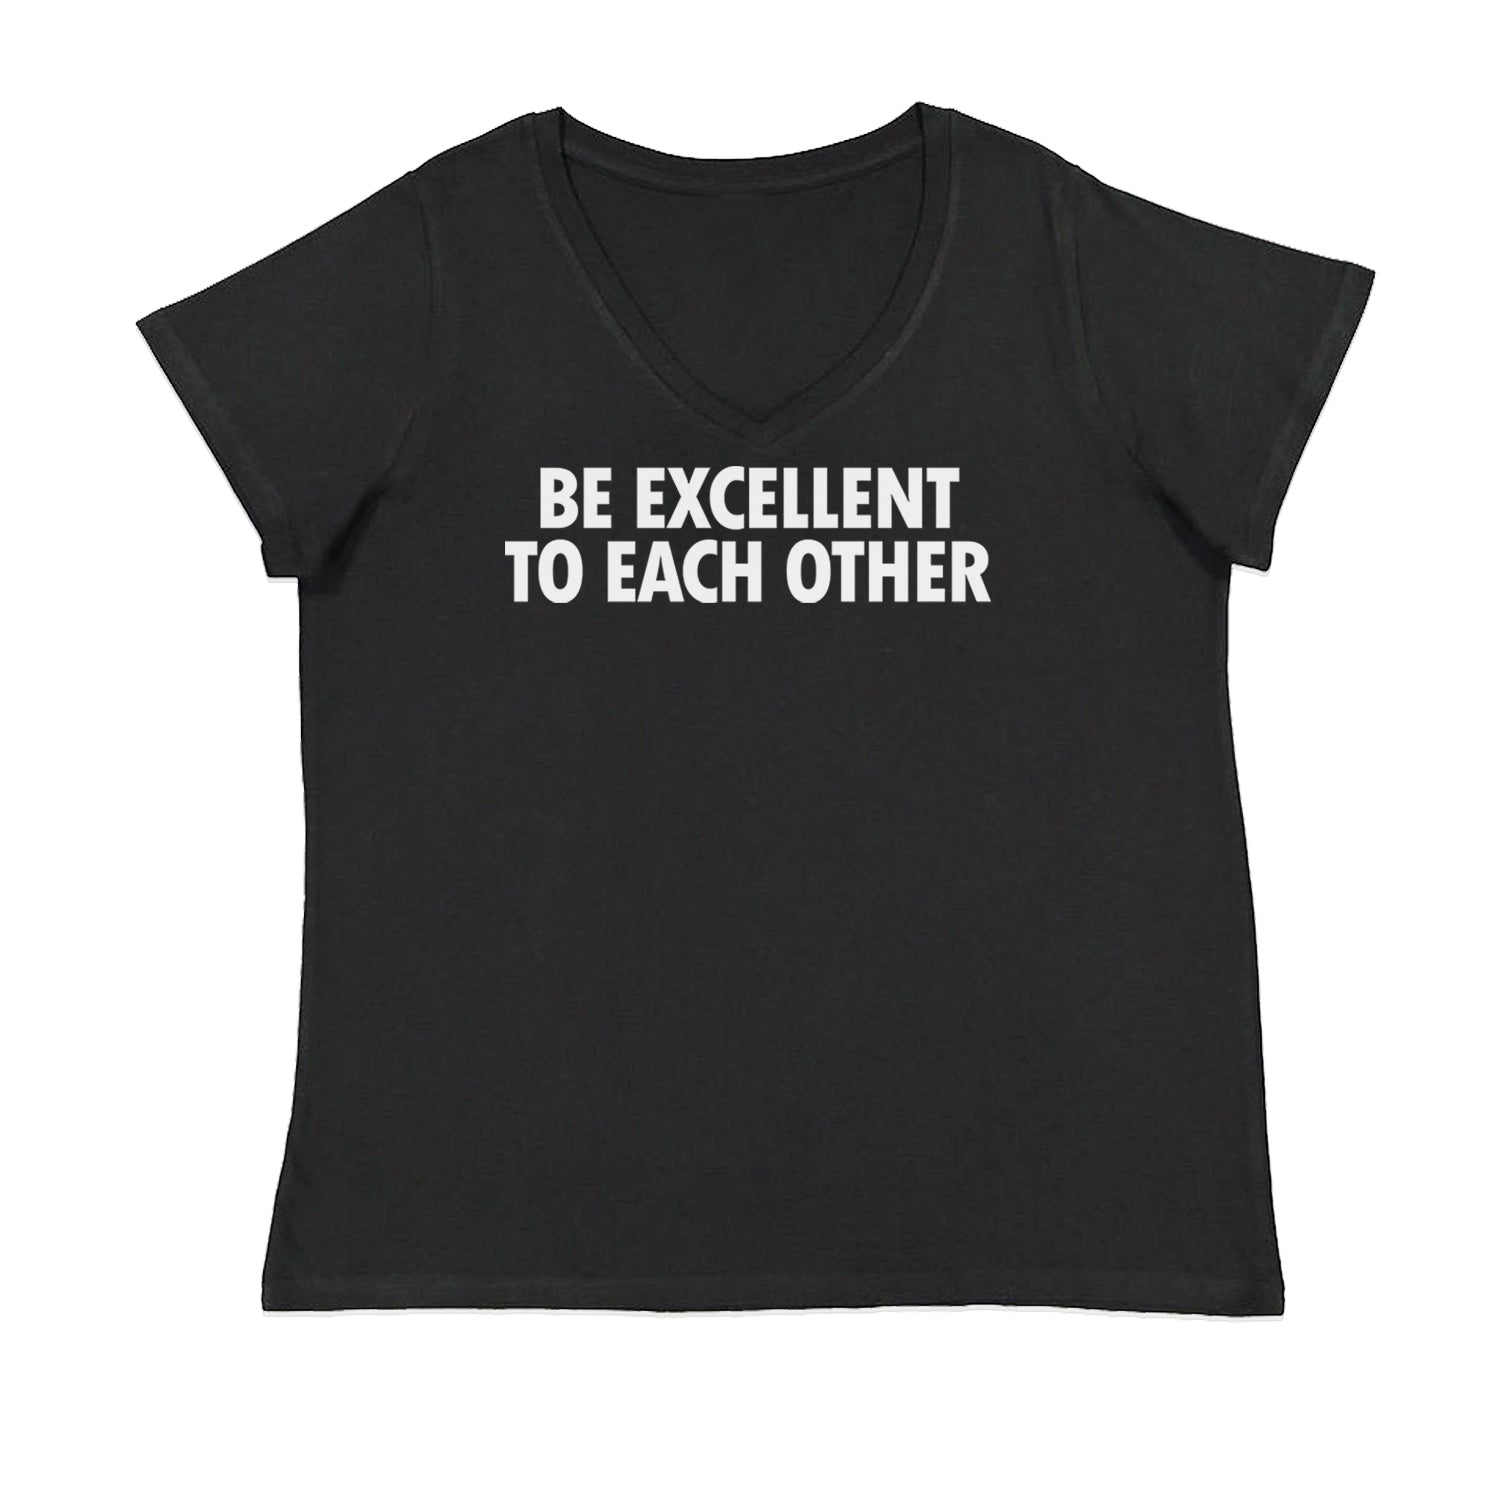 Be Excellent To Each Other Womens Plus Size V-Neck T-shirt